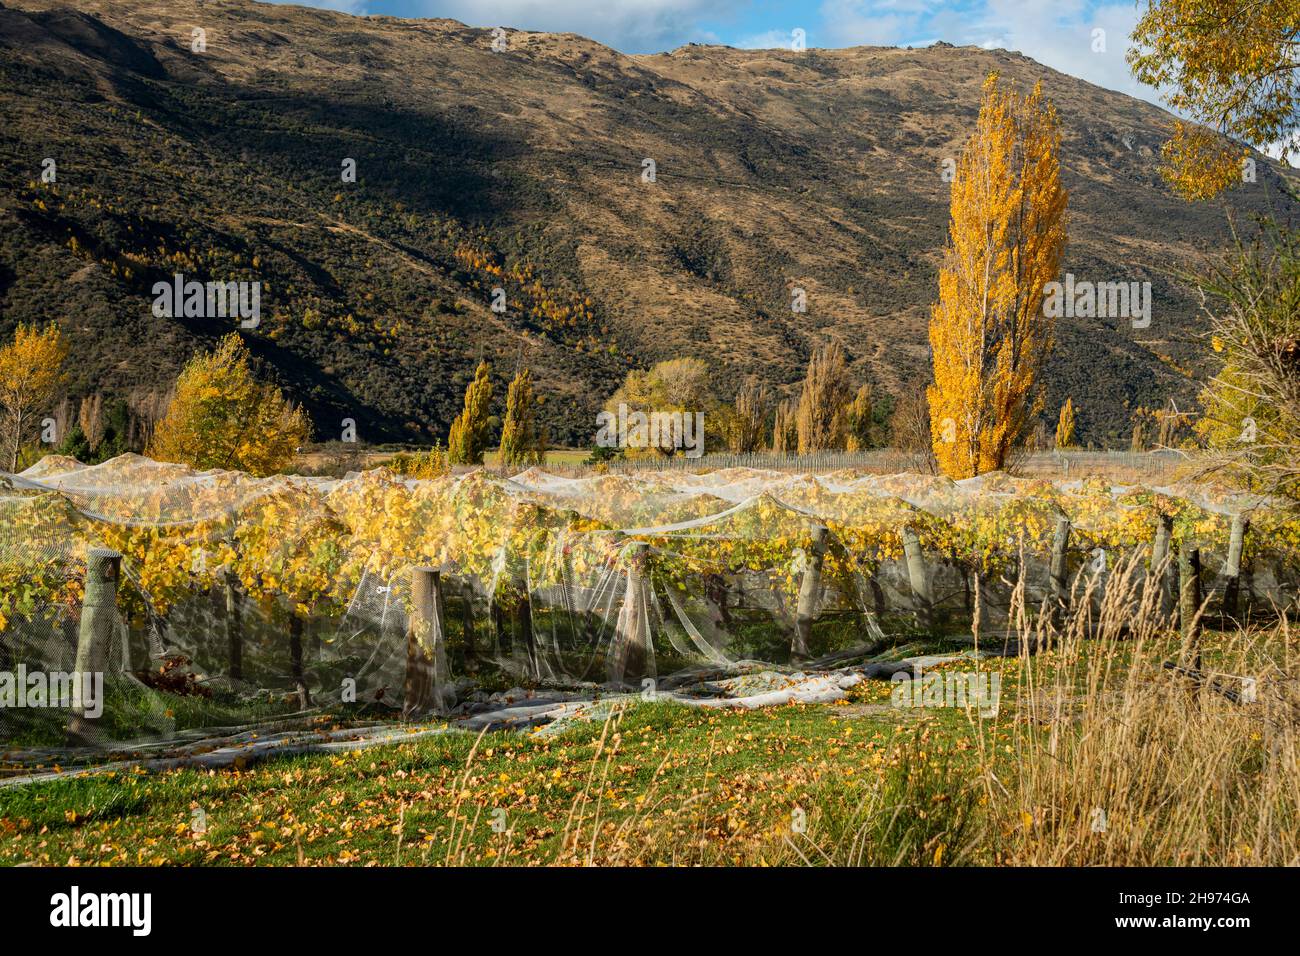 Autumn landscape of vineyard with white netting to prevent bird and wind damage, Otago region, South Island of New Zealand Stock Photo